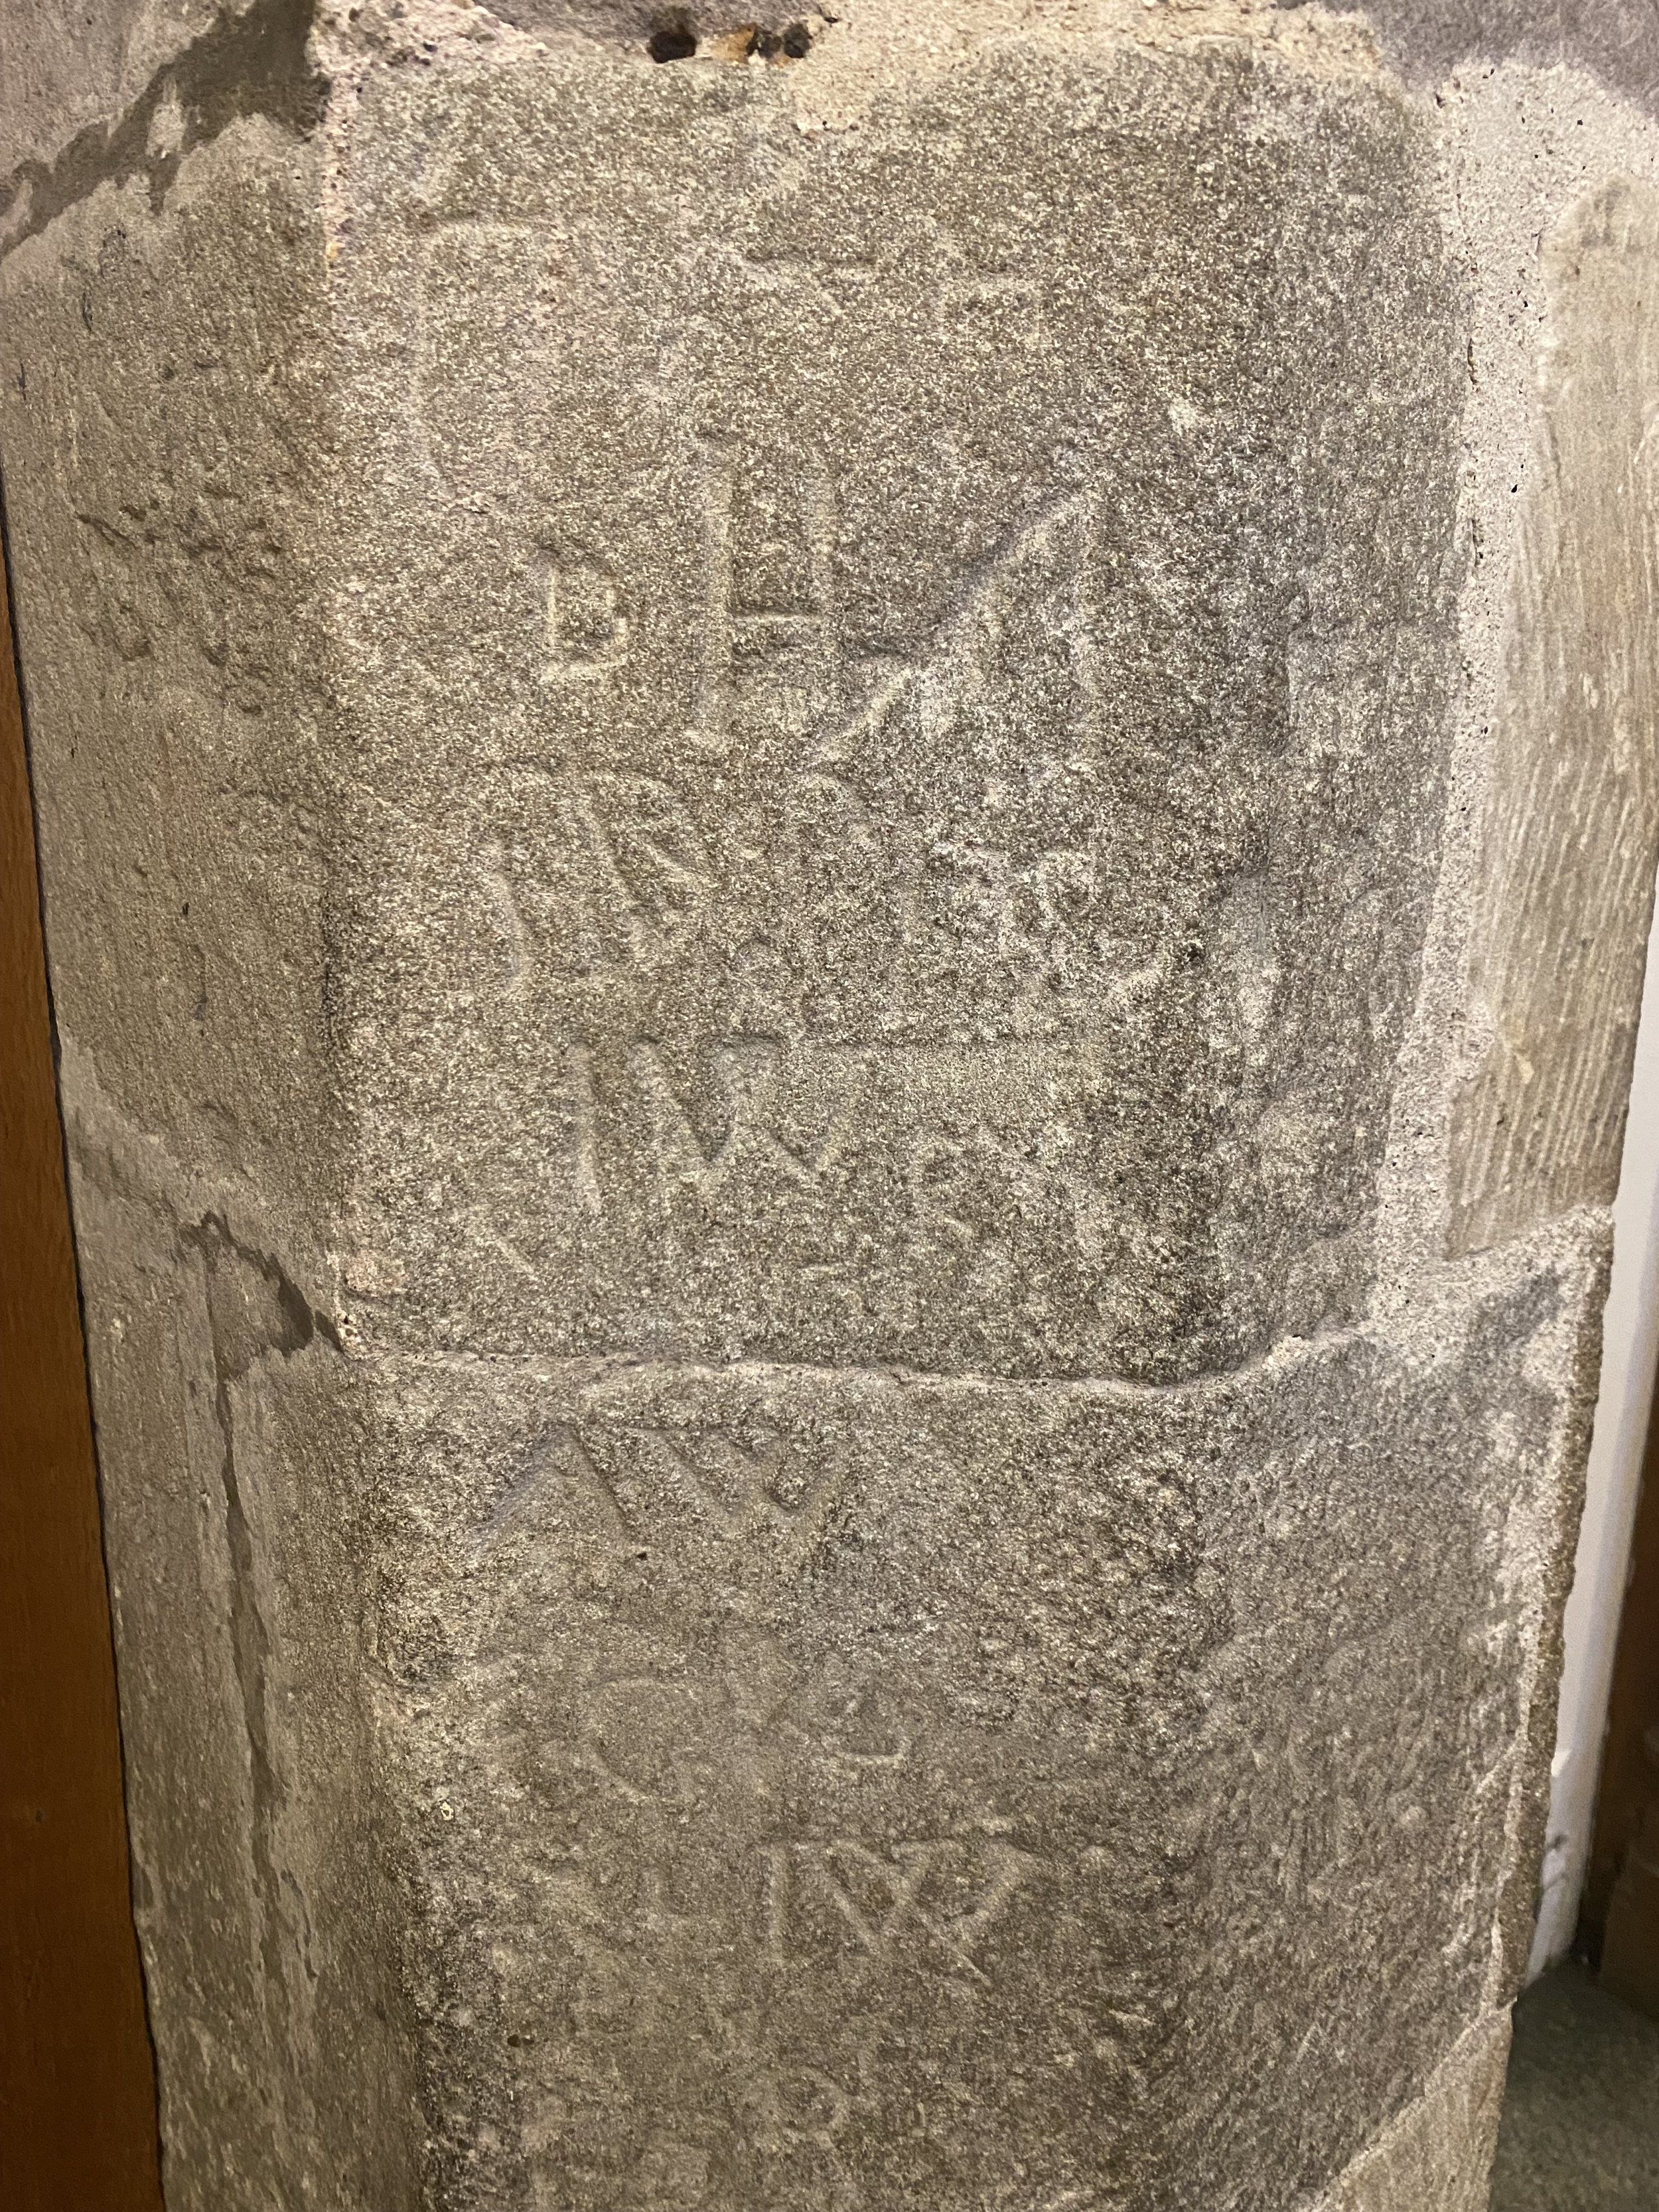 Graffiti from the 14th-15th century in the schoolroom at Dunblane Cathedral.